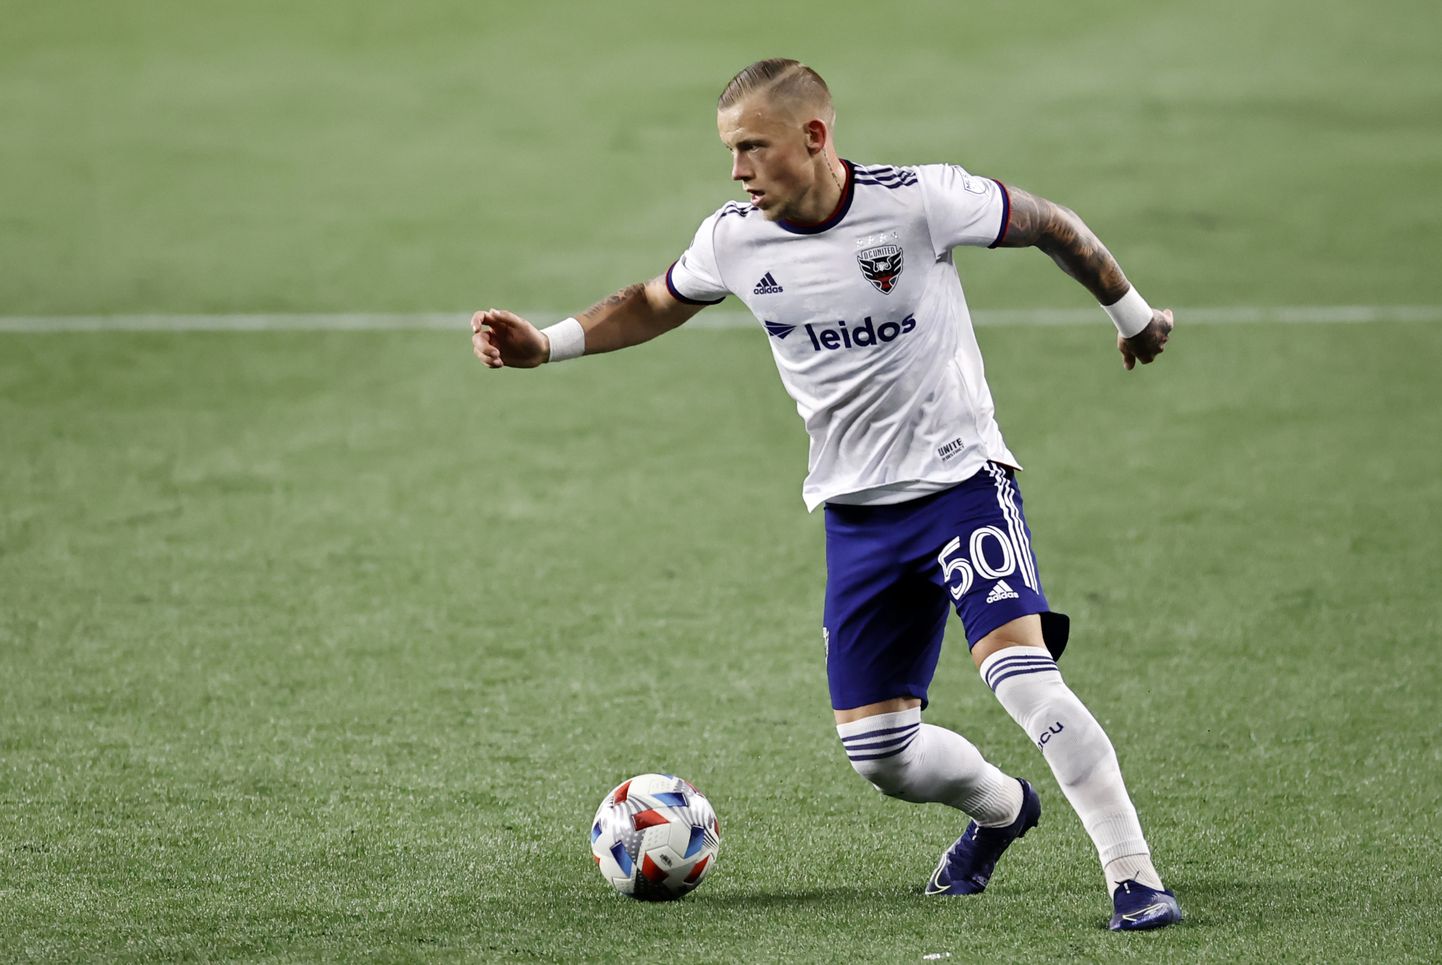 April 24, 2021, Foxborough, MA, USA: FOXBOROUGH, MA - APRIL 24: DC United forward Erik Sorga (50) cuts inside during a match between the New England Revolution and DC United on April 24, 2021, at Gillette Stadium in Foxborough, Massachusetts. (Photo by Fred Kfoury III/Icon Sportswire) (Credit Image: © Fred Kfoury Iii/Icon SMI via ZUMA Press)